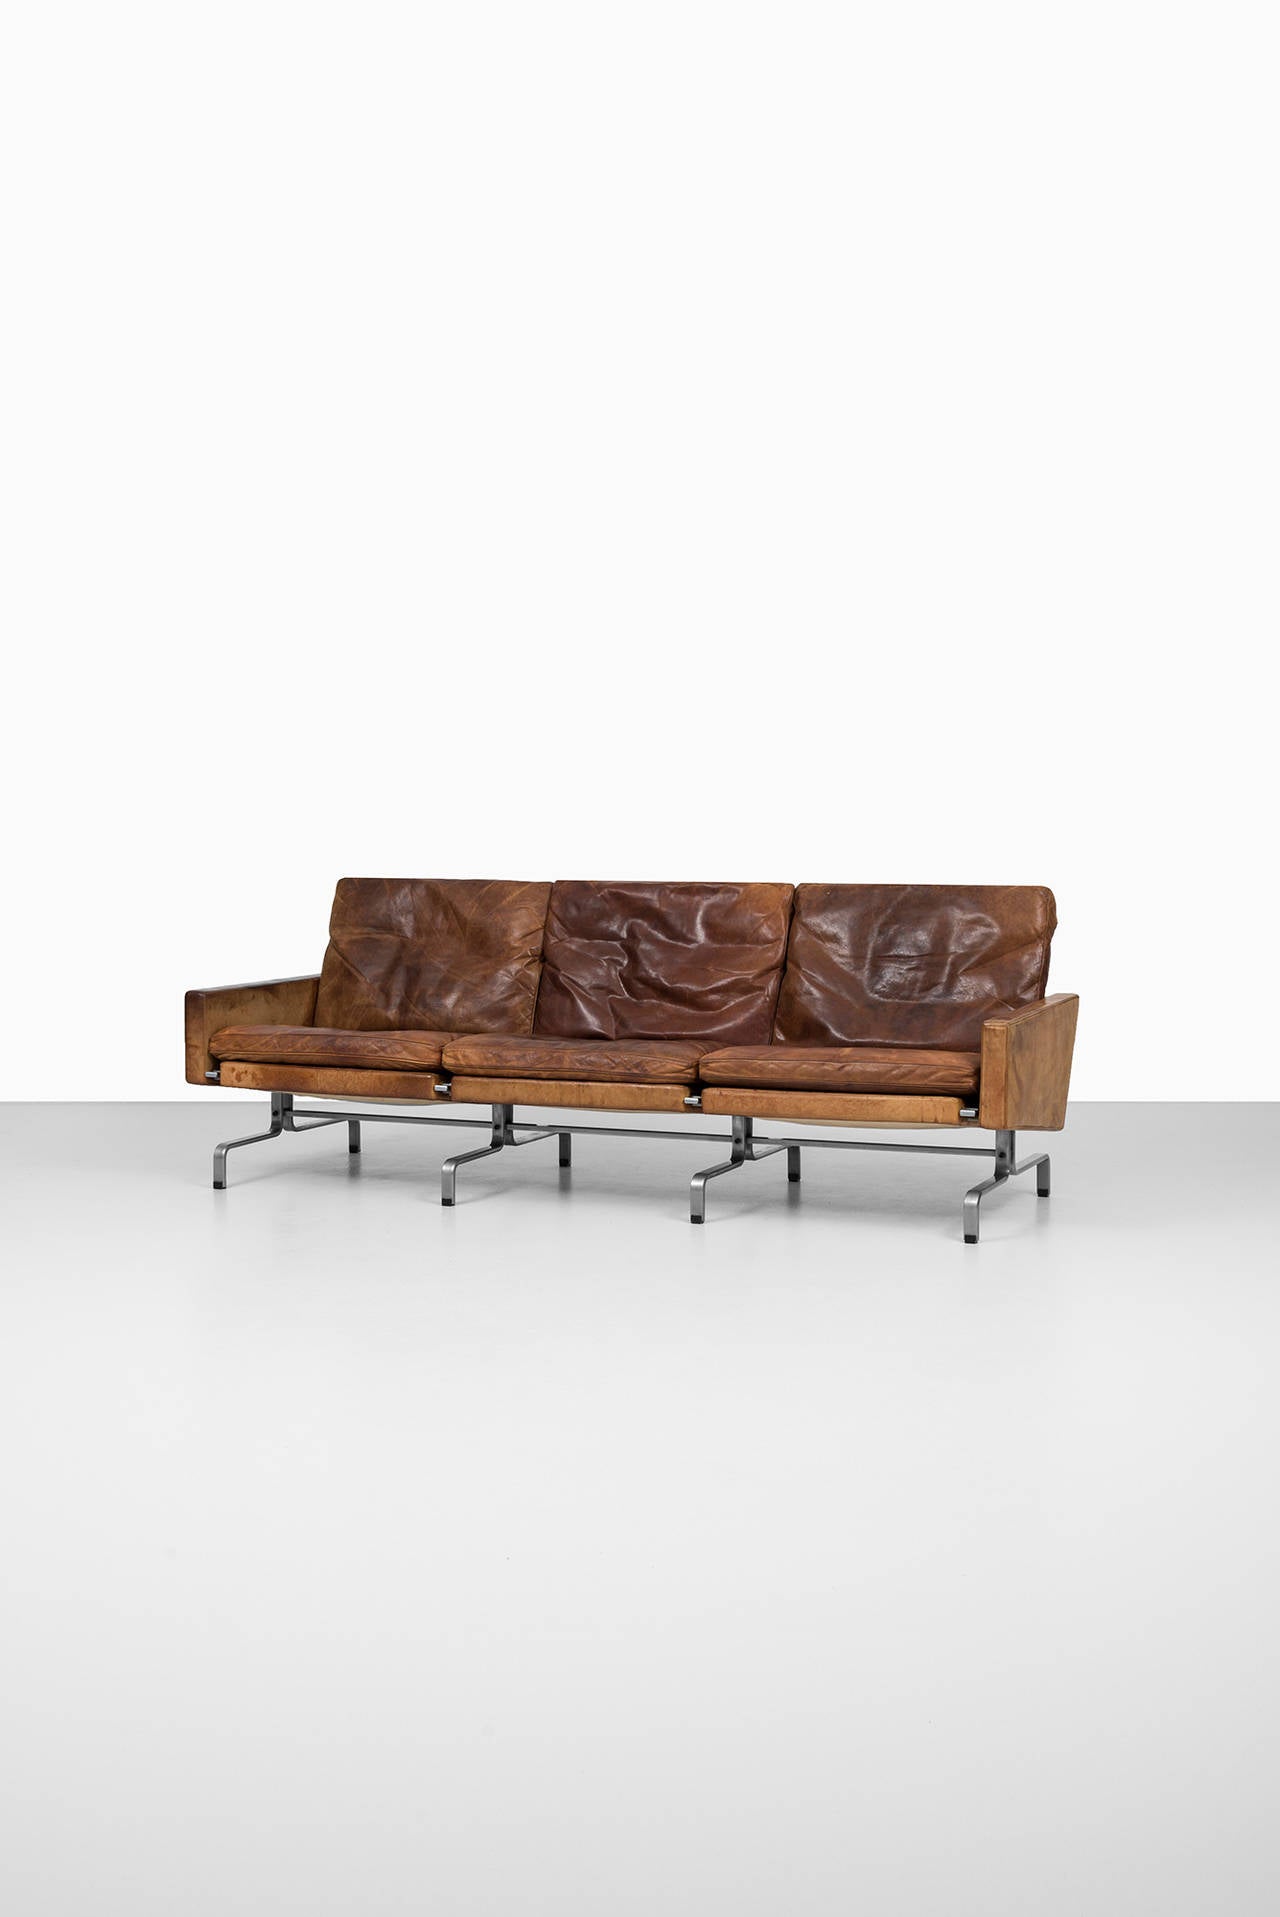 Rare PK-31/3 sofa in cognac brown leather with amazing patina and flat steel designed by Poul Kjærholm. Produced by first producer E. Kold Christensen in Denmark. Designed in 1958.